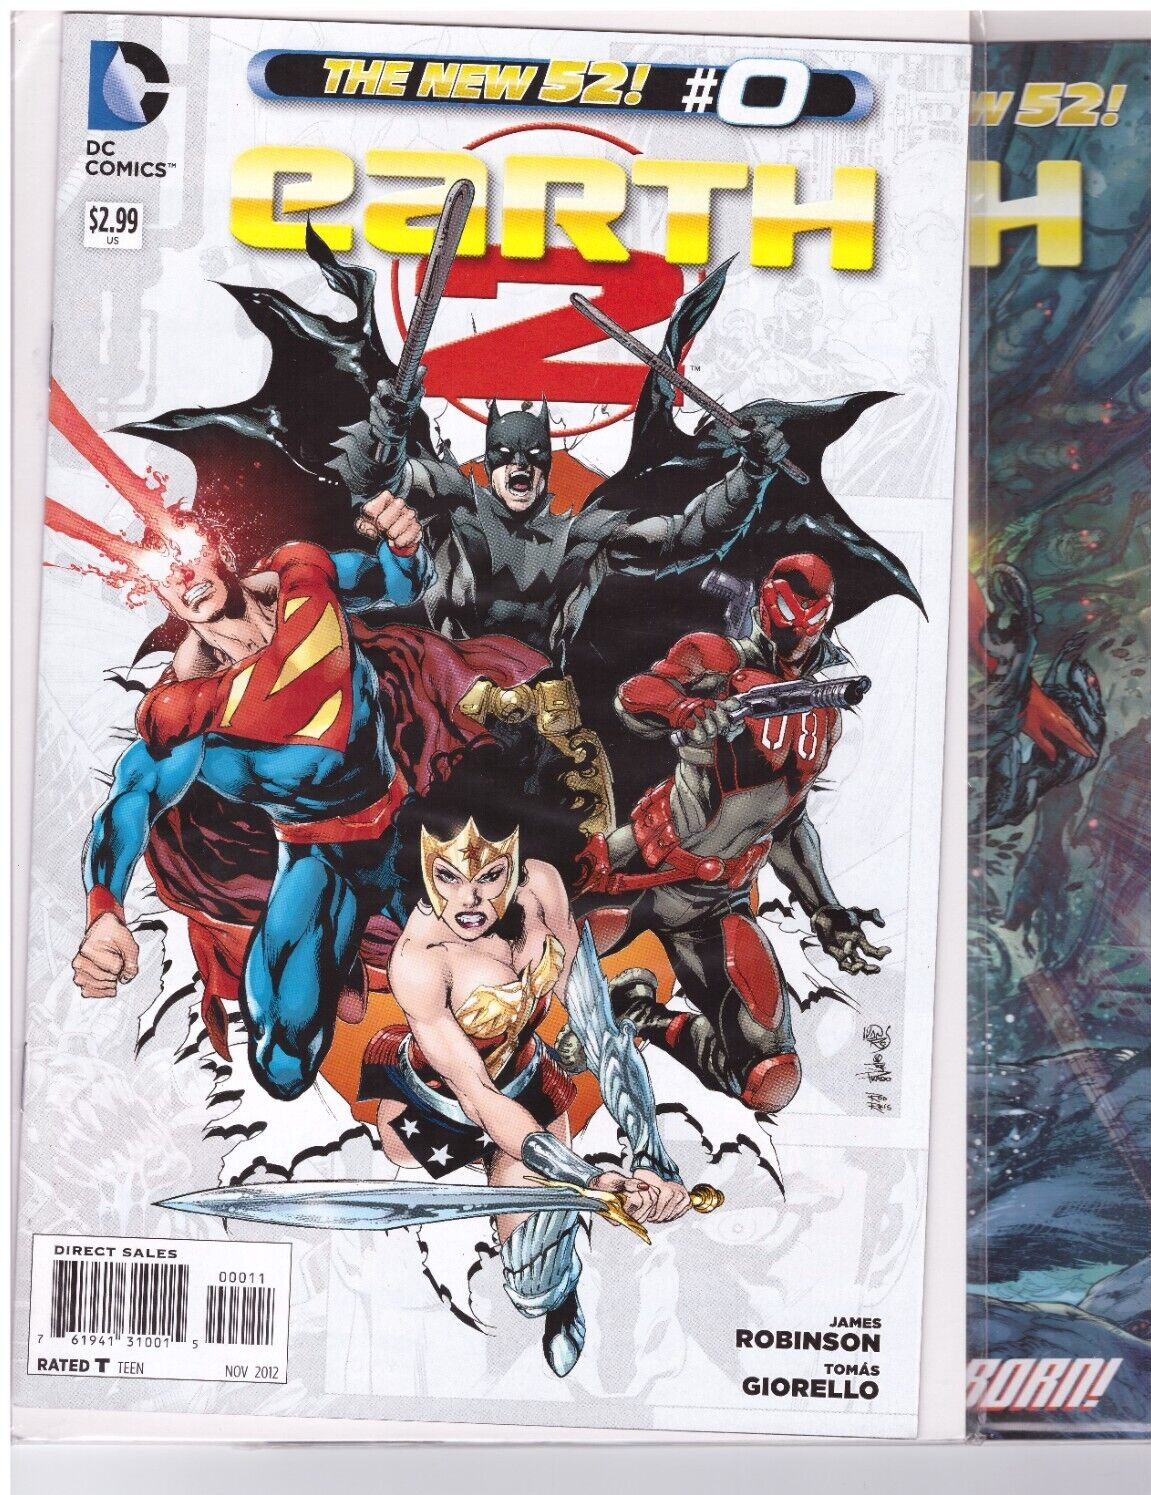 The New 52 Earth 2 #25 #26 Val-Zod Superman 1ST #0 #2 #8 #9 #10 #14 #16 #17 #28